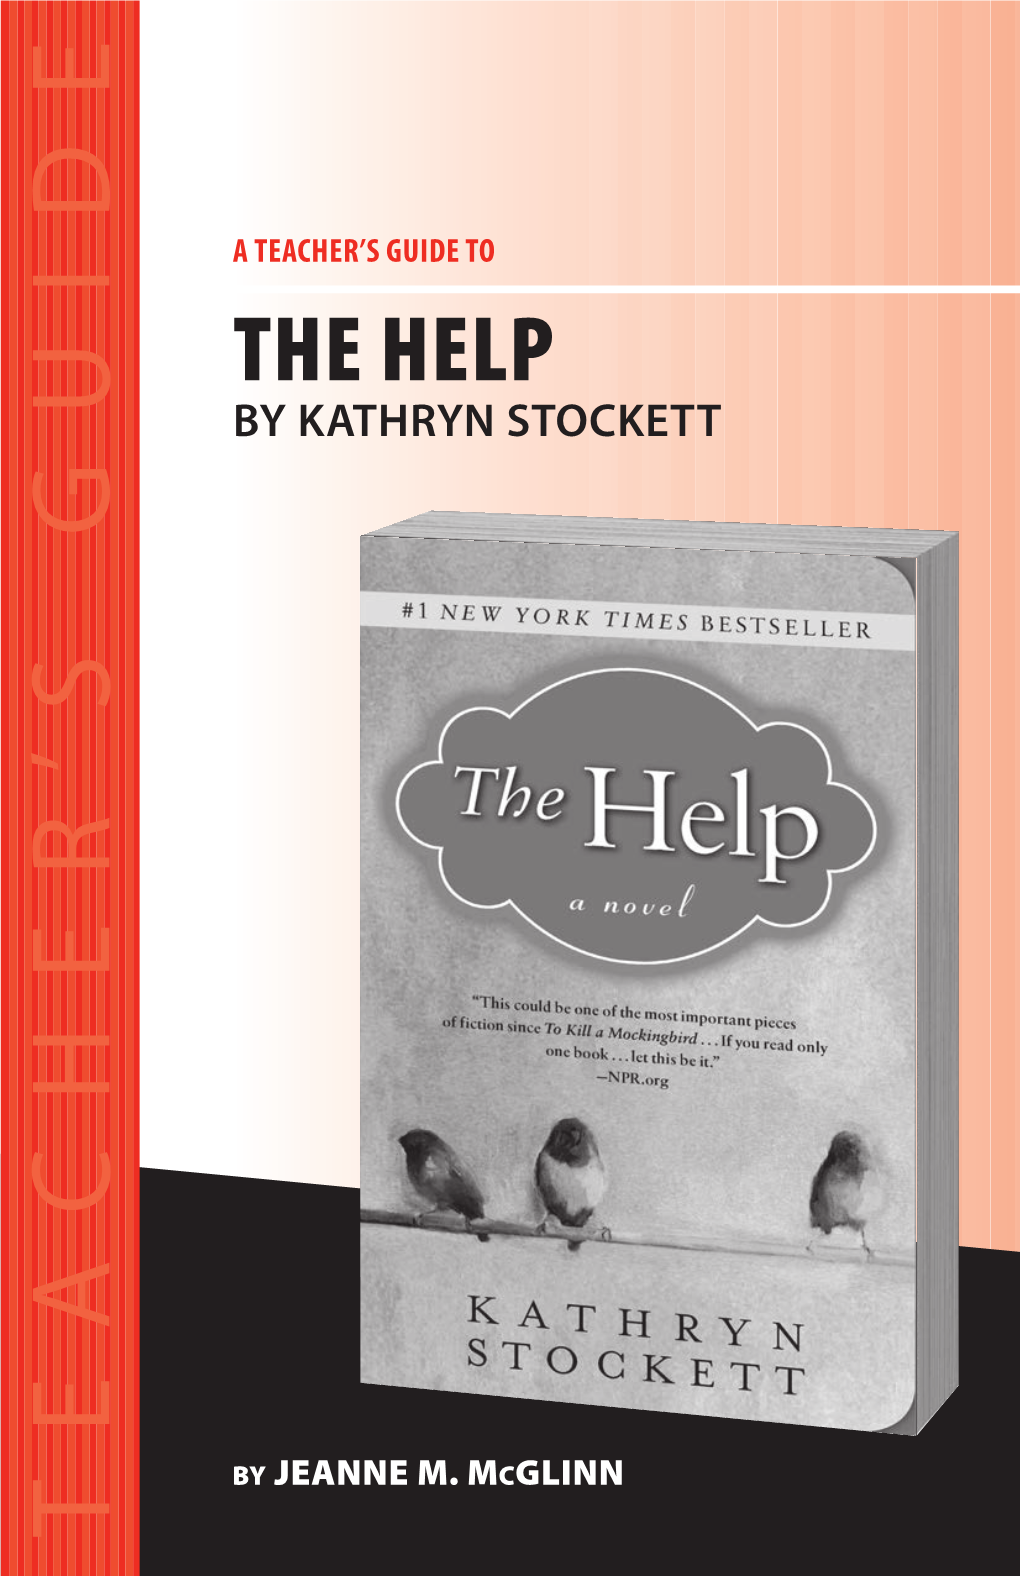 DR Stockett Help TG 100912B.Indd 1 10/24/12 5:14 PM 2 a Teacher’S Guide to the Help by Kathryn Stockett